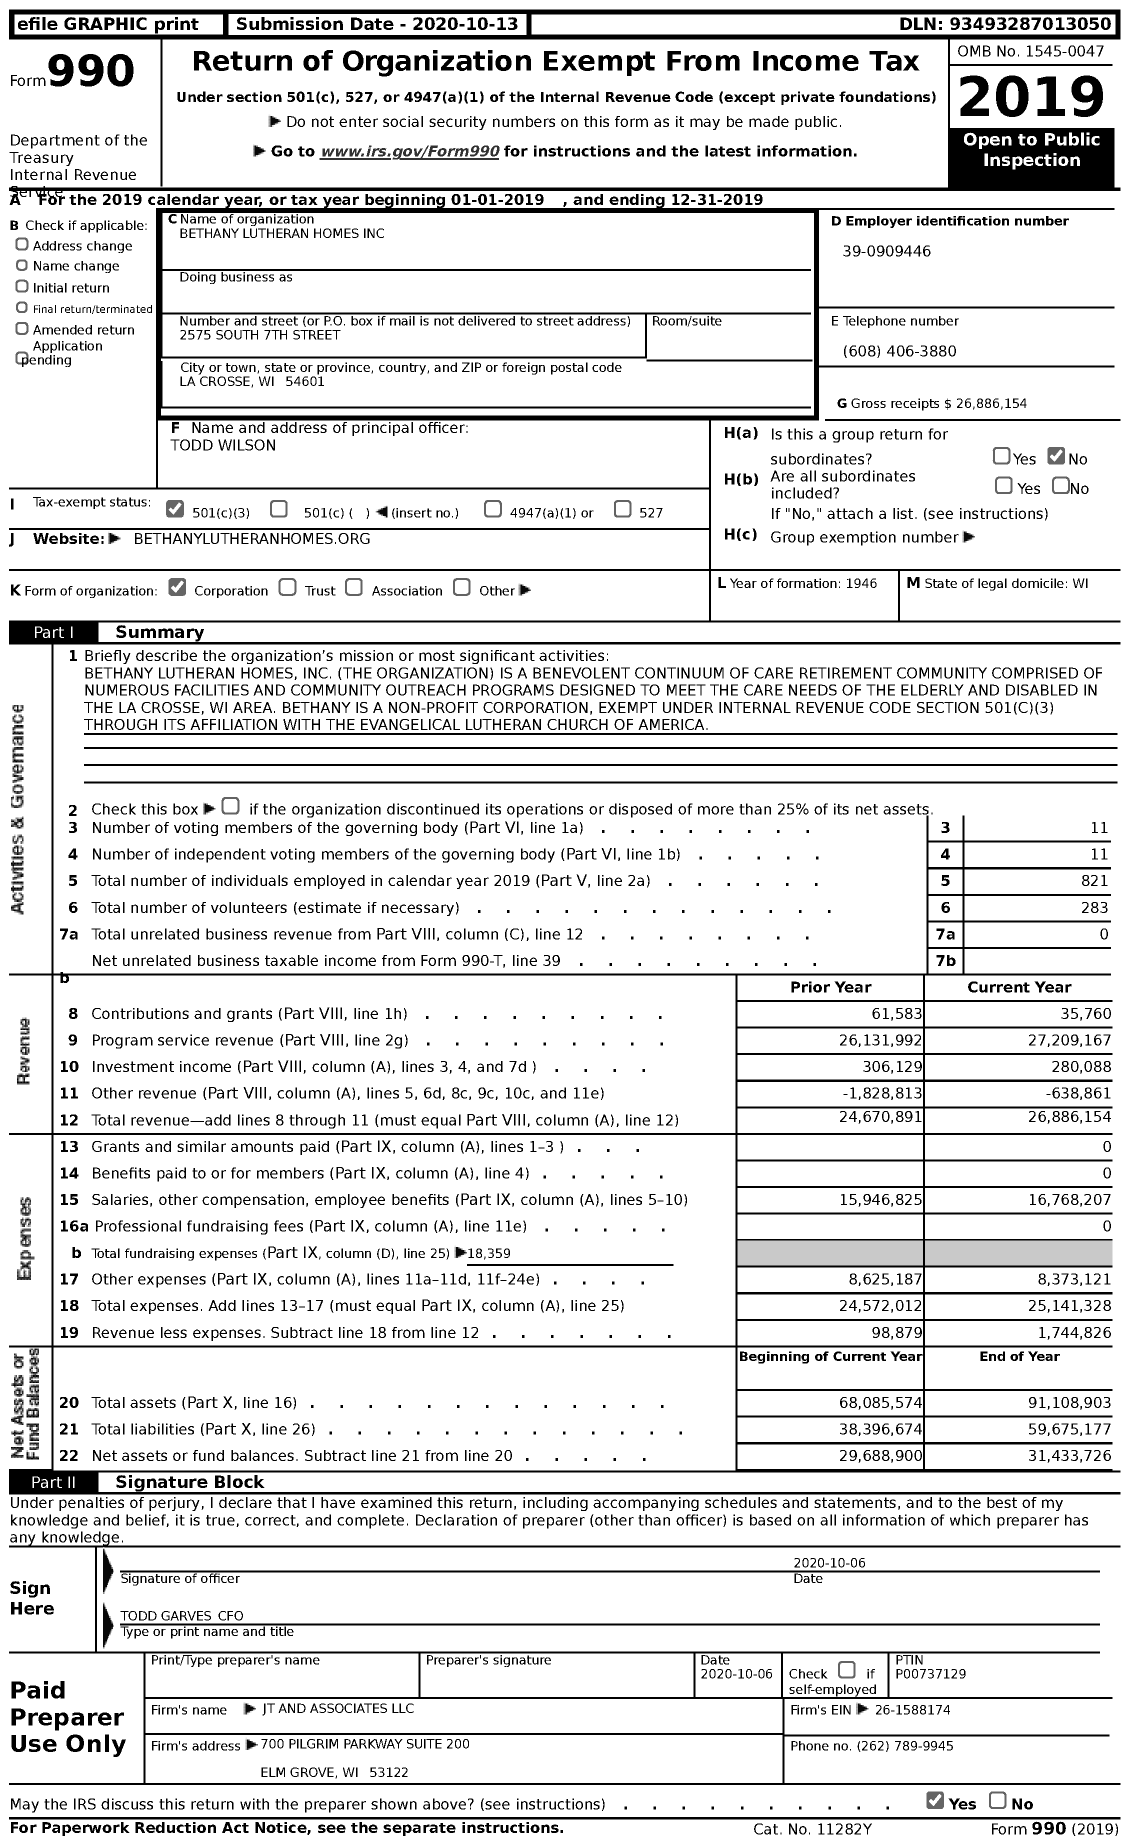 Image of first page of 2019 Form 990 for Eagle Crest Communities